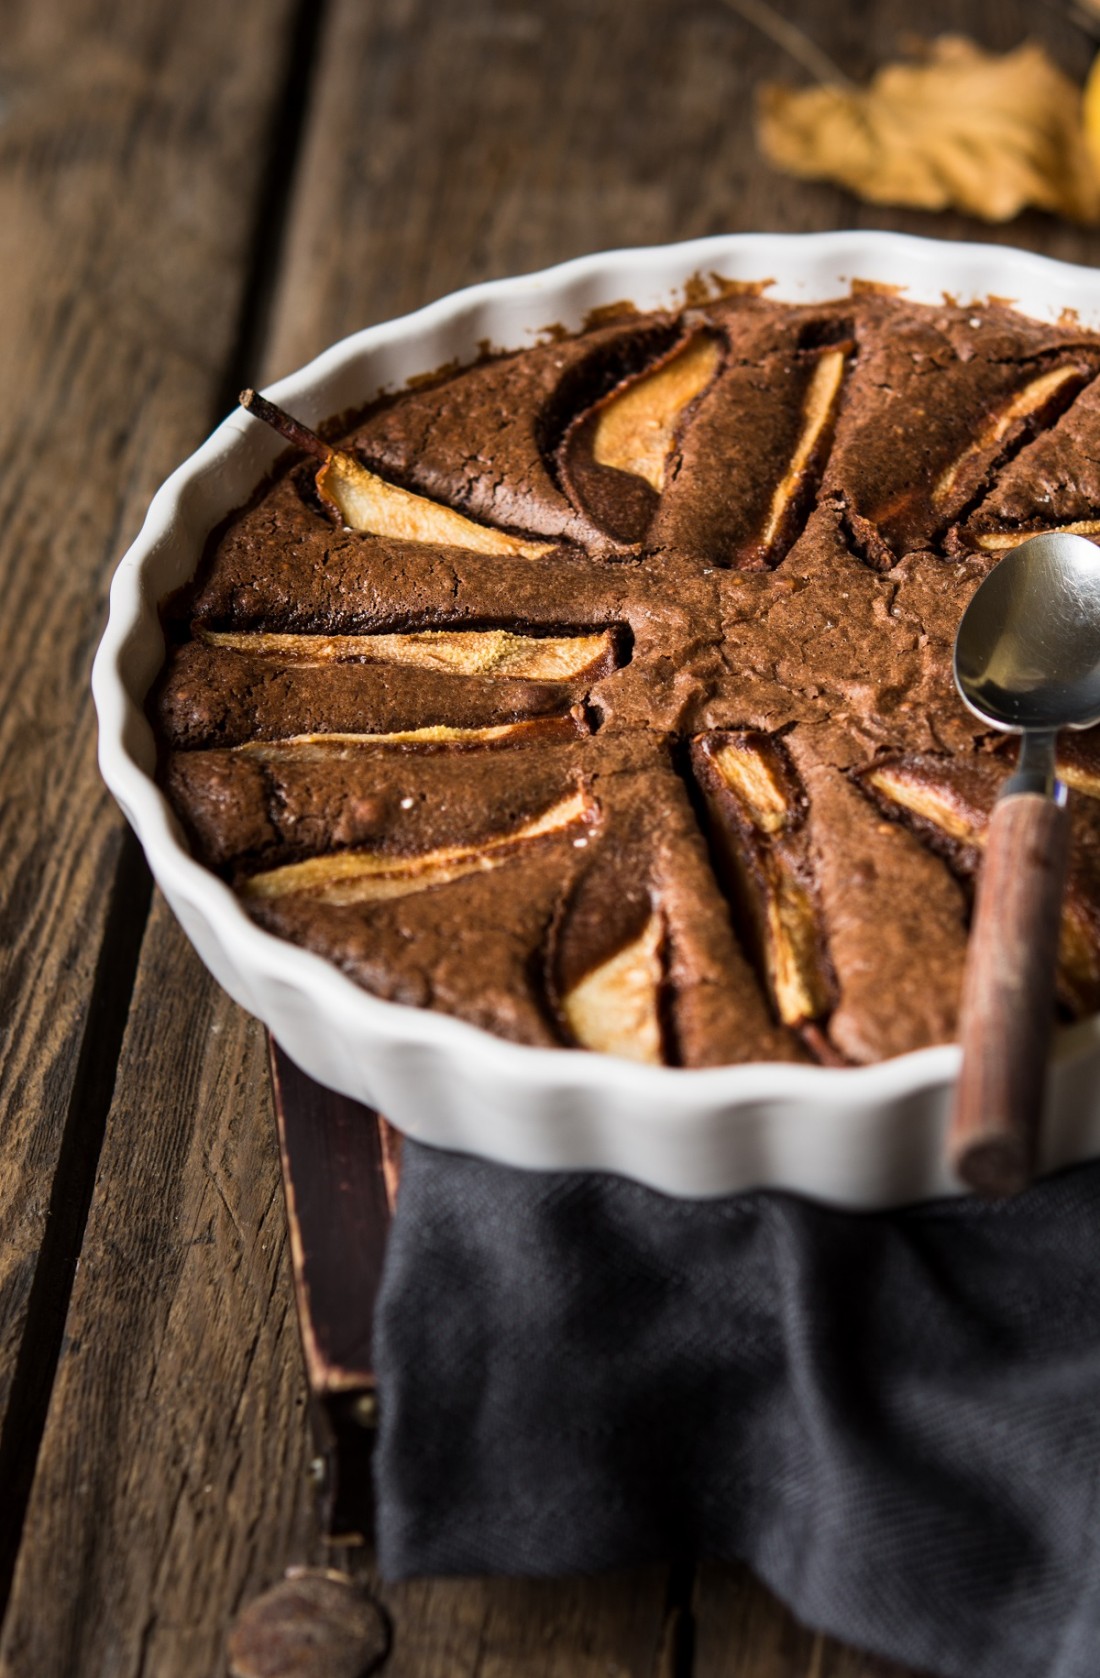 Chocolate clafoutis with pears